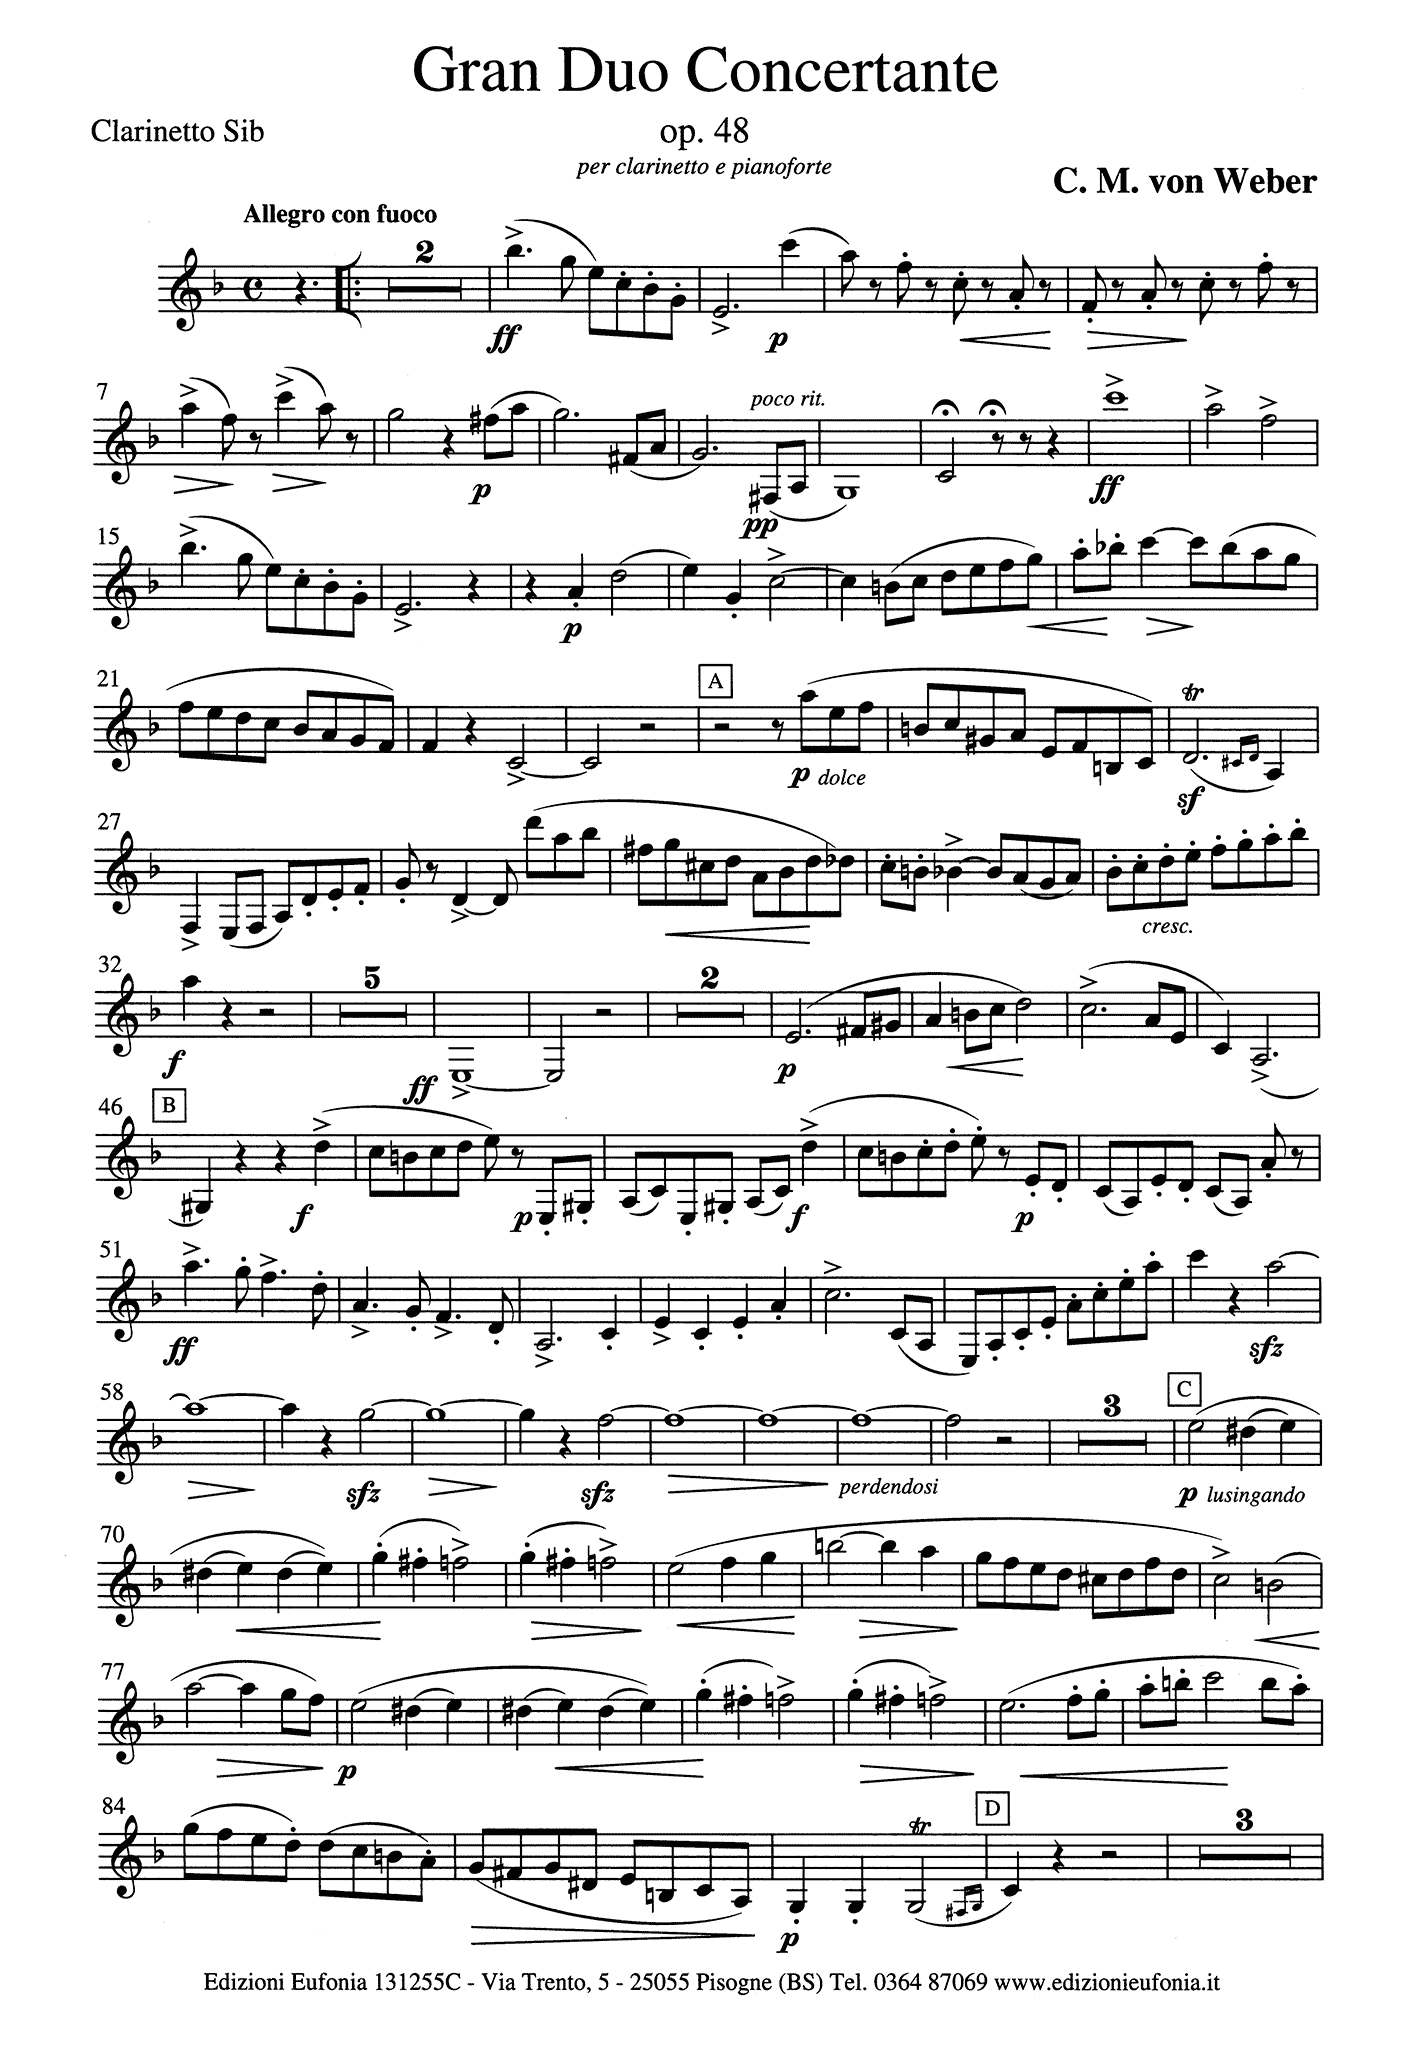 Grand Duo Concertant, Op. 48 Clarinet part